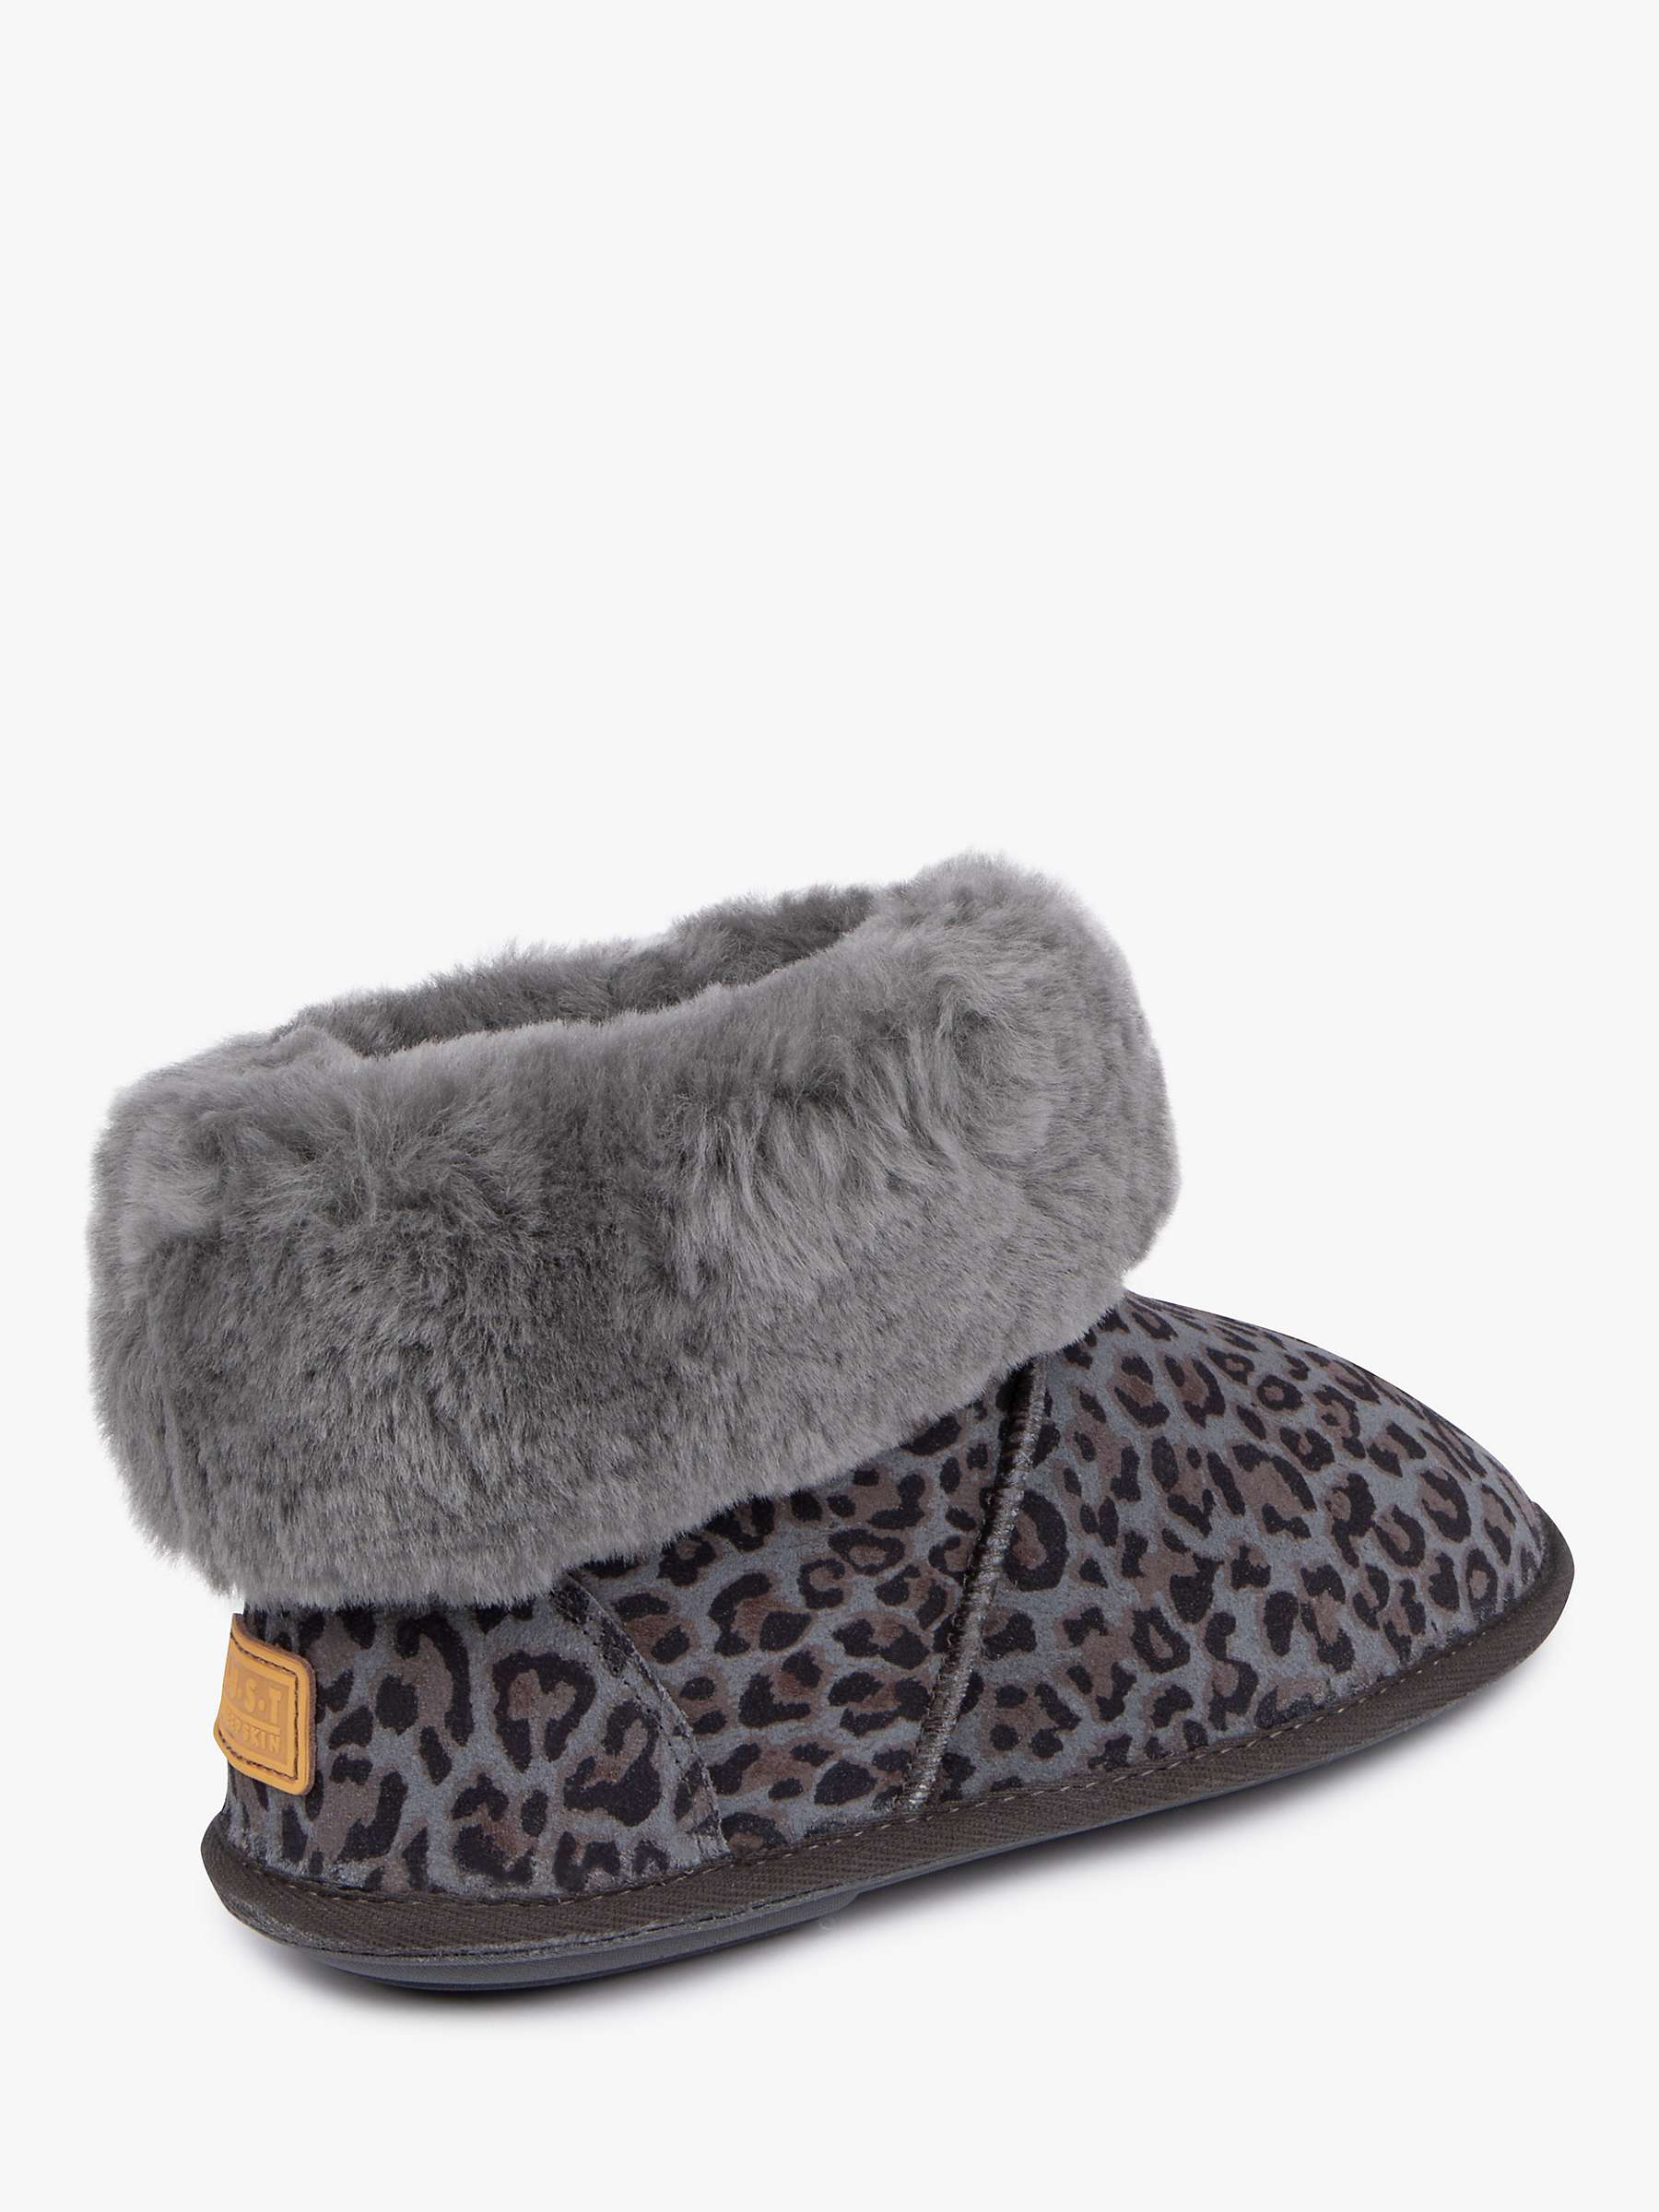 Just Sheepskin Albery Suede Slipper Boots, Grey Animal at John Lewis &  Partners